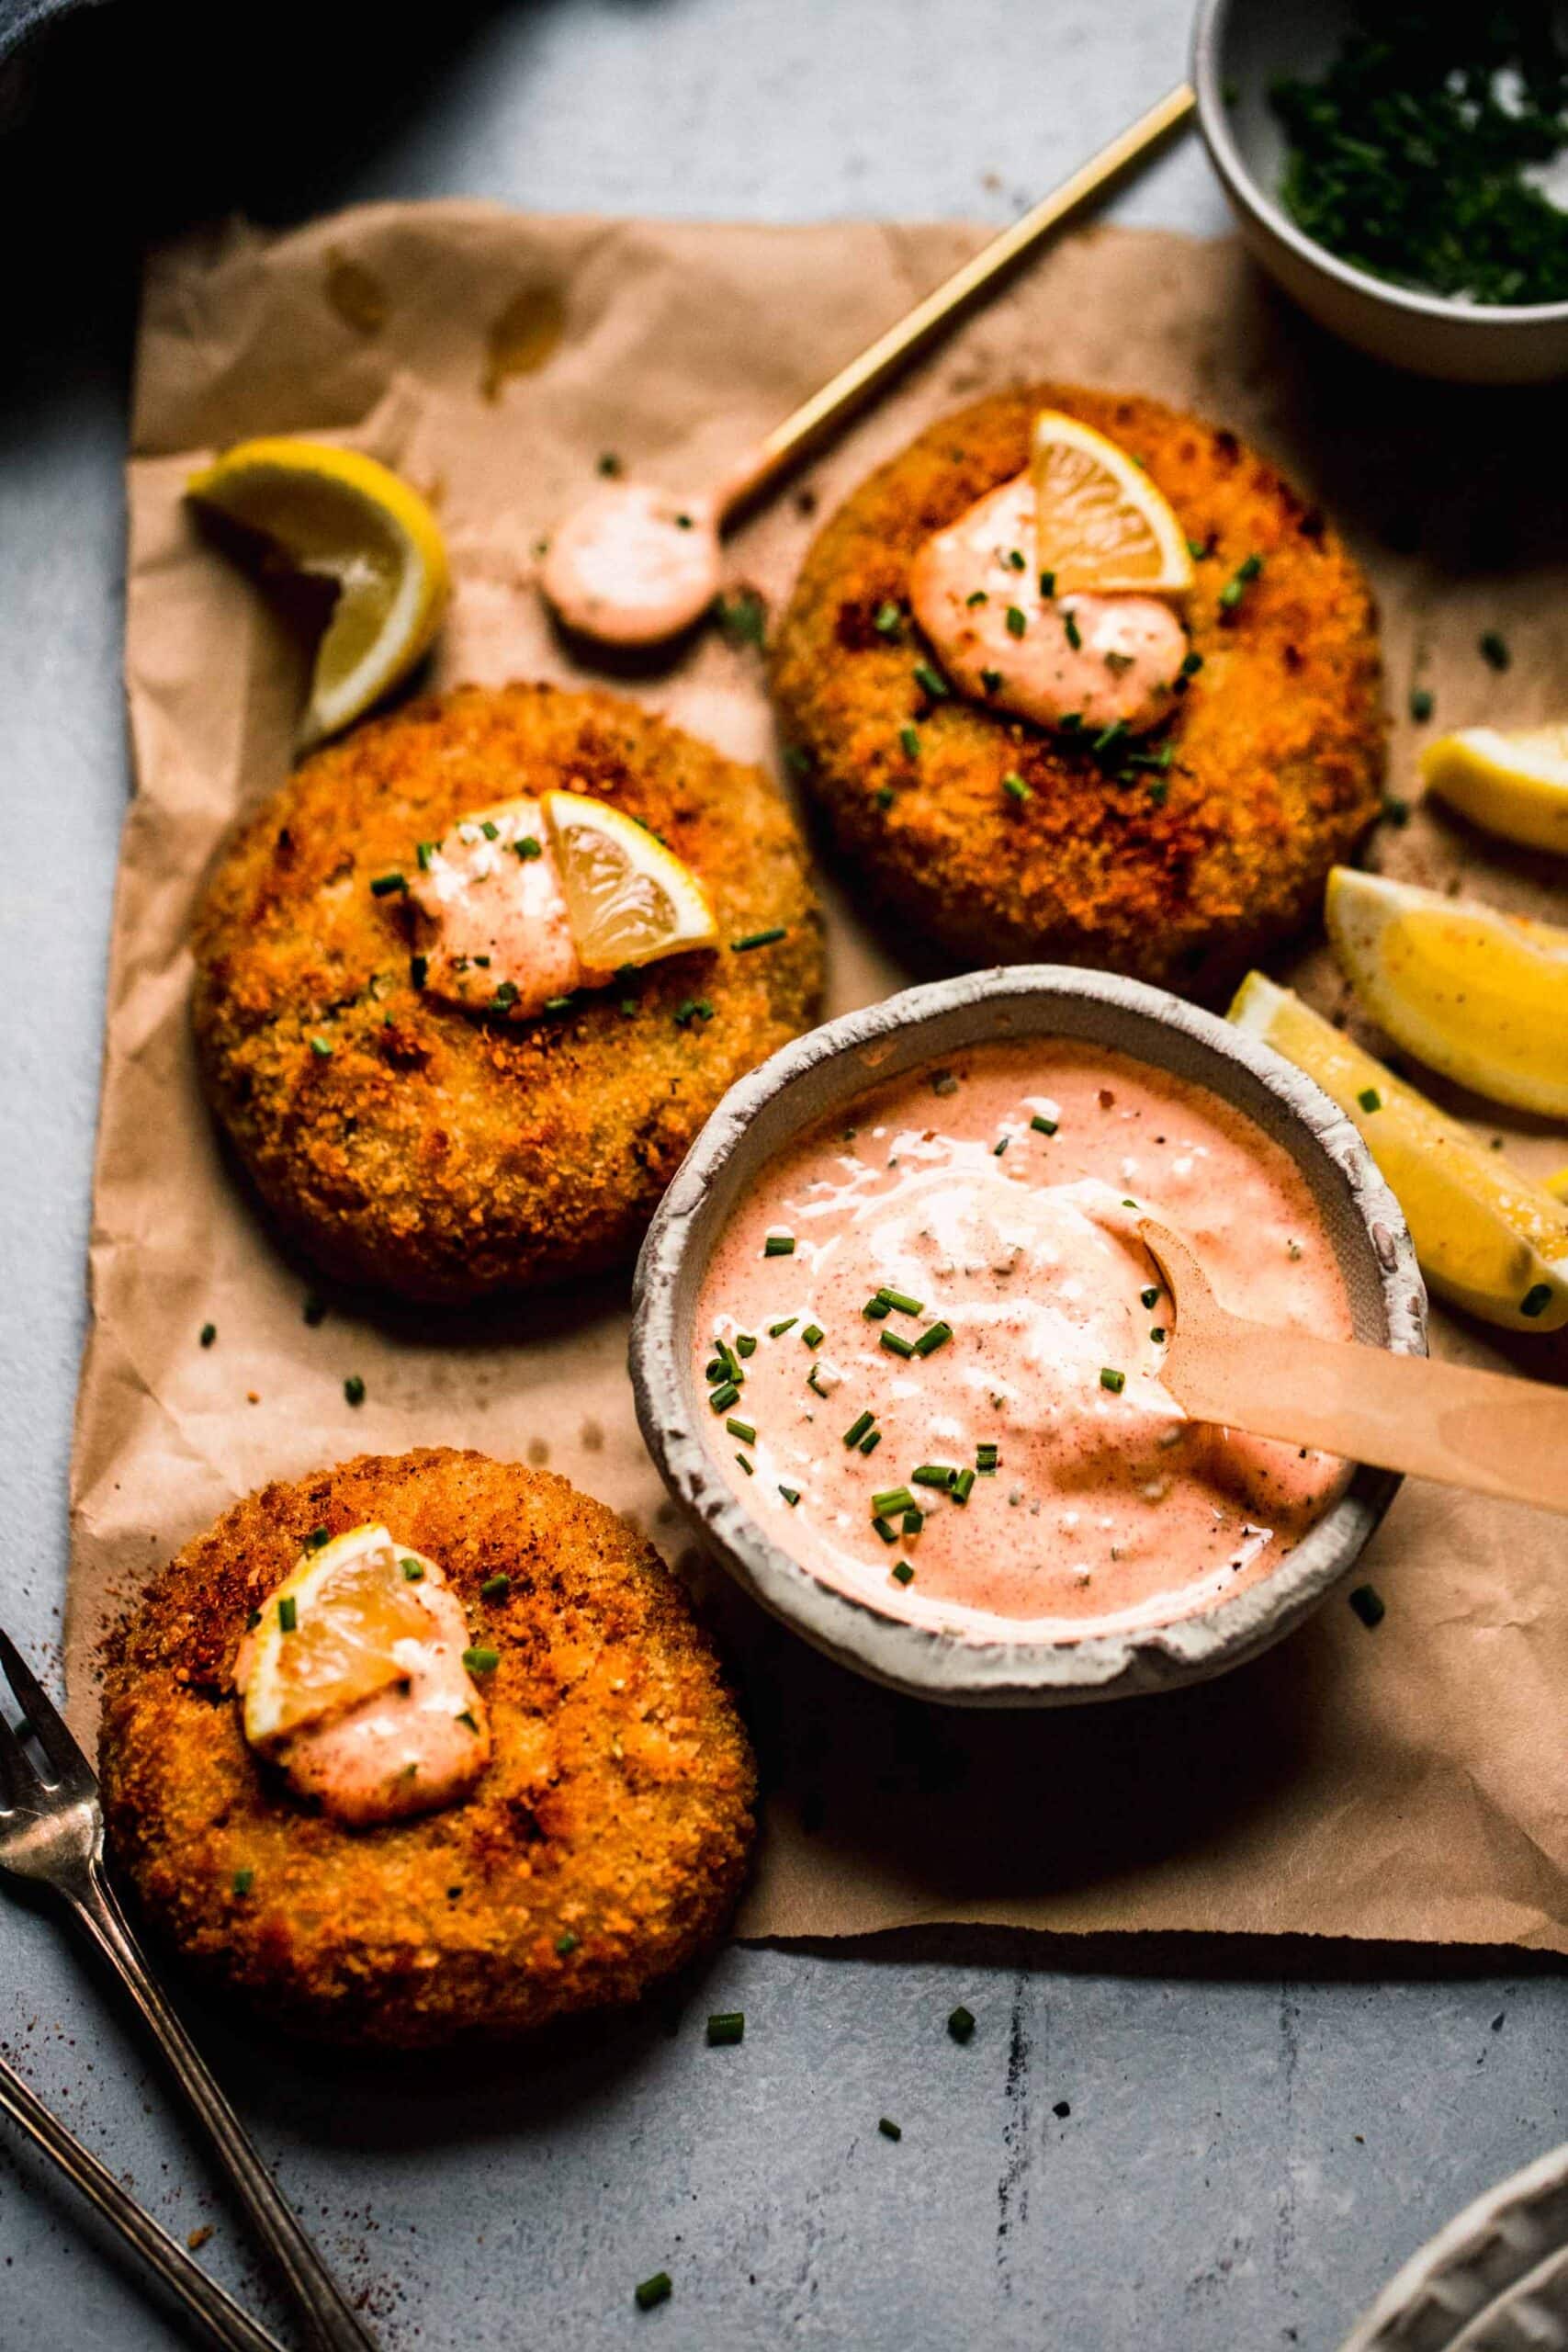 Crab cakes topped with lemon wedges and dollops of crab cake sauce.